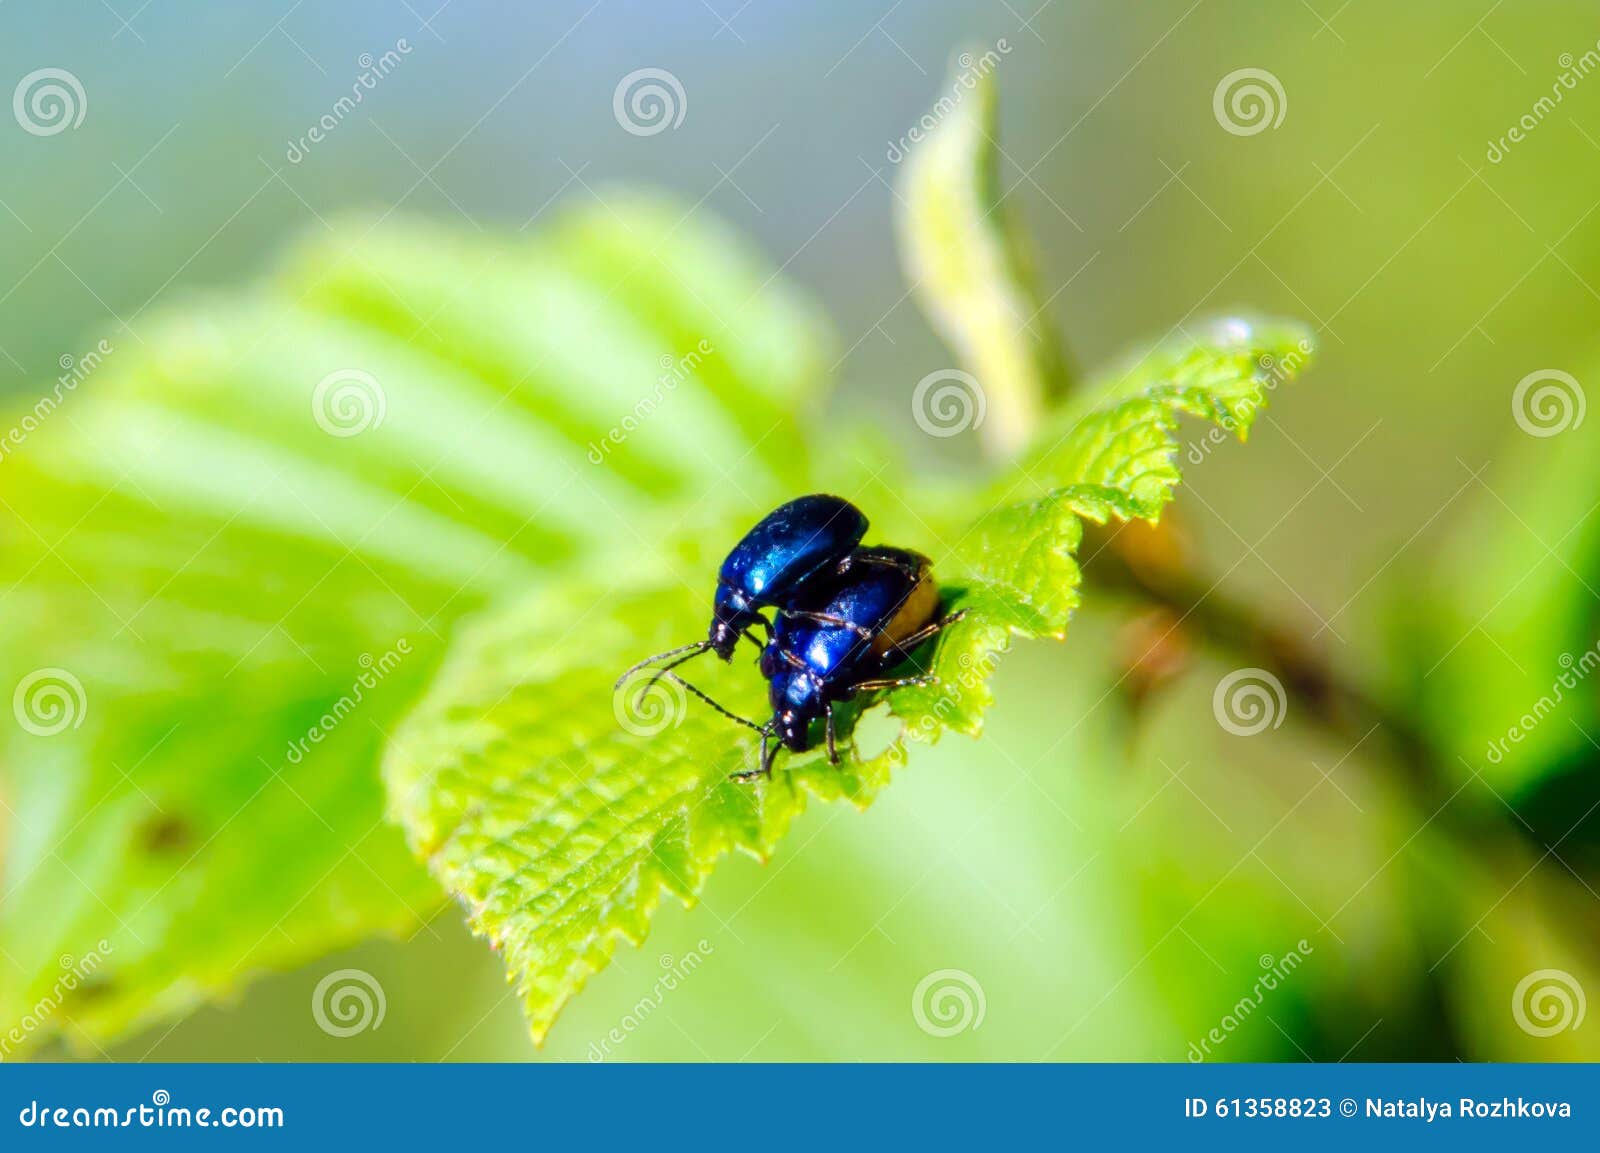 Sex Of Beetles Stock Image Image Of Beauty Detail 61358823